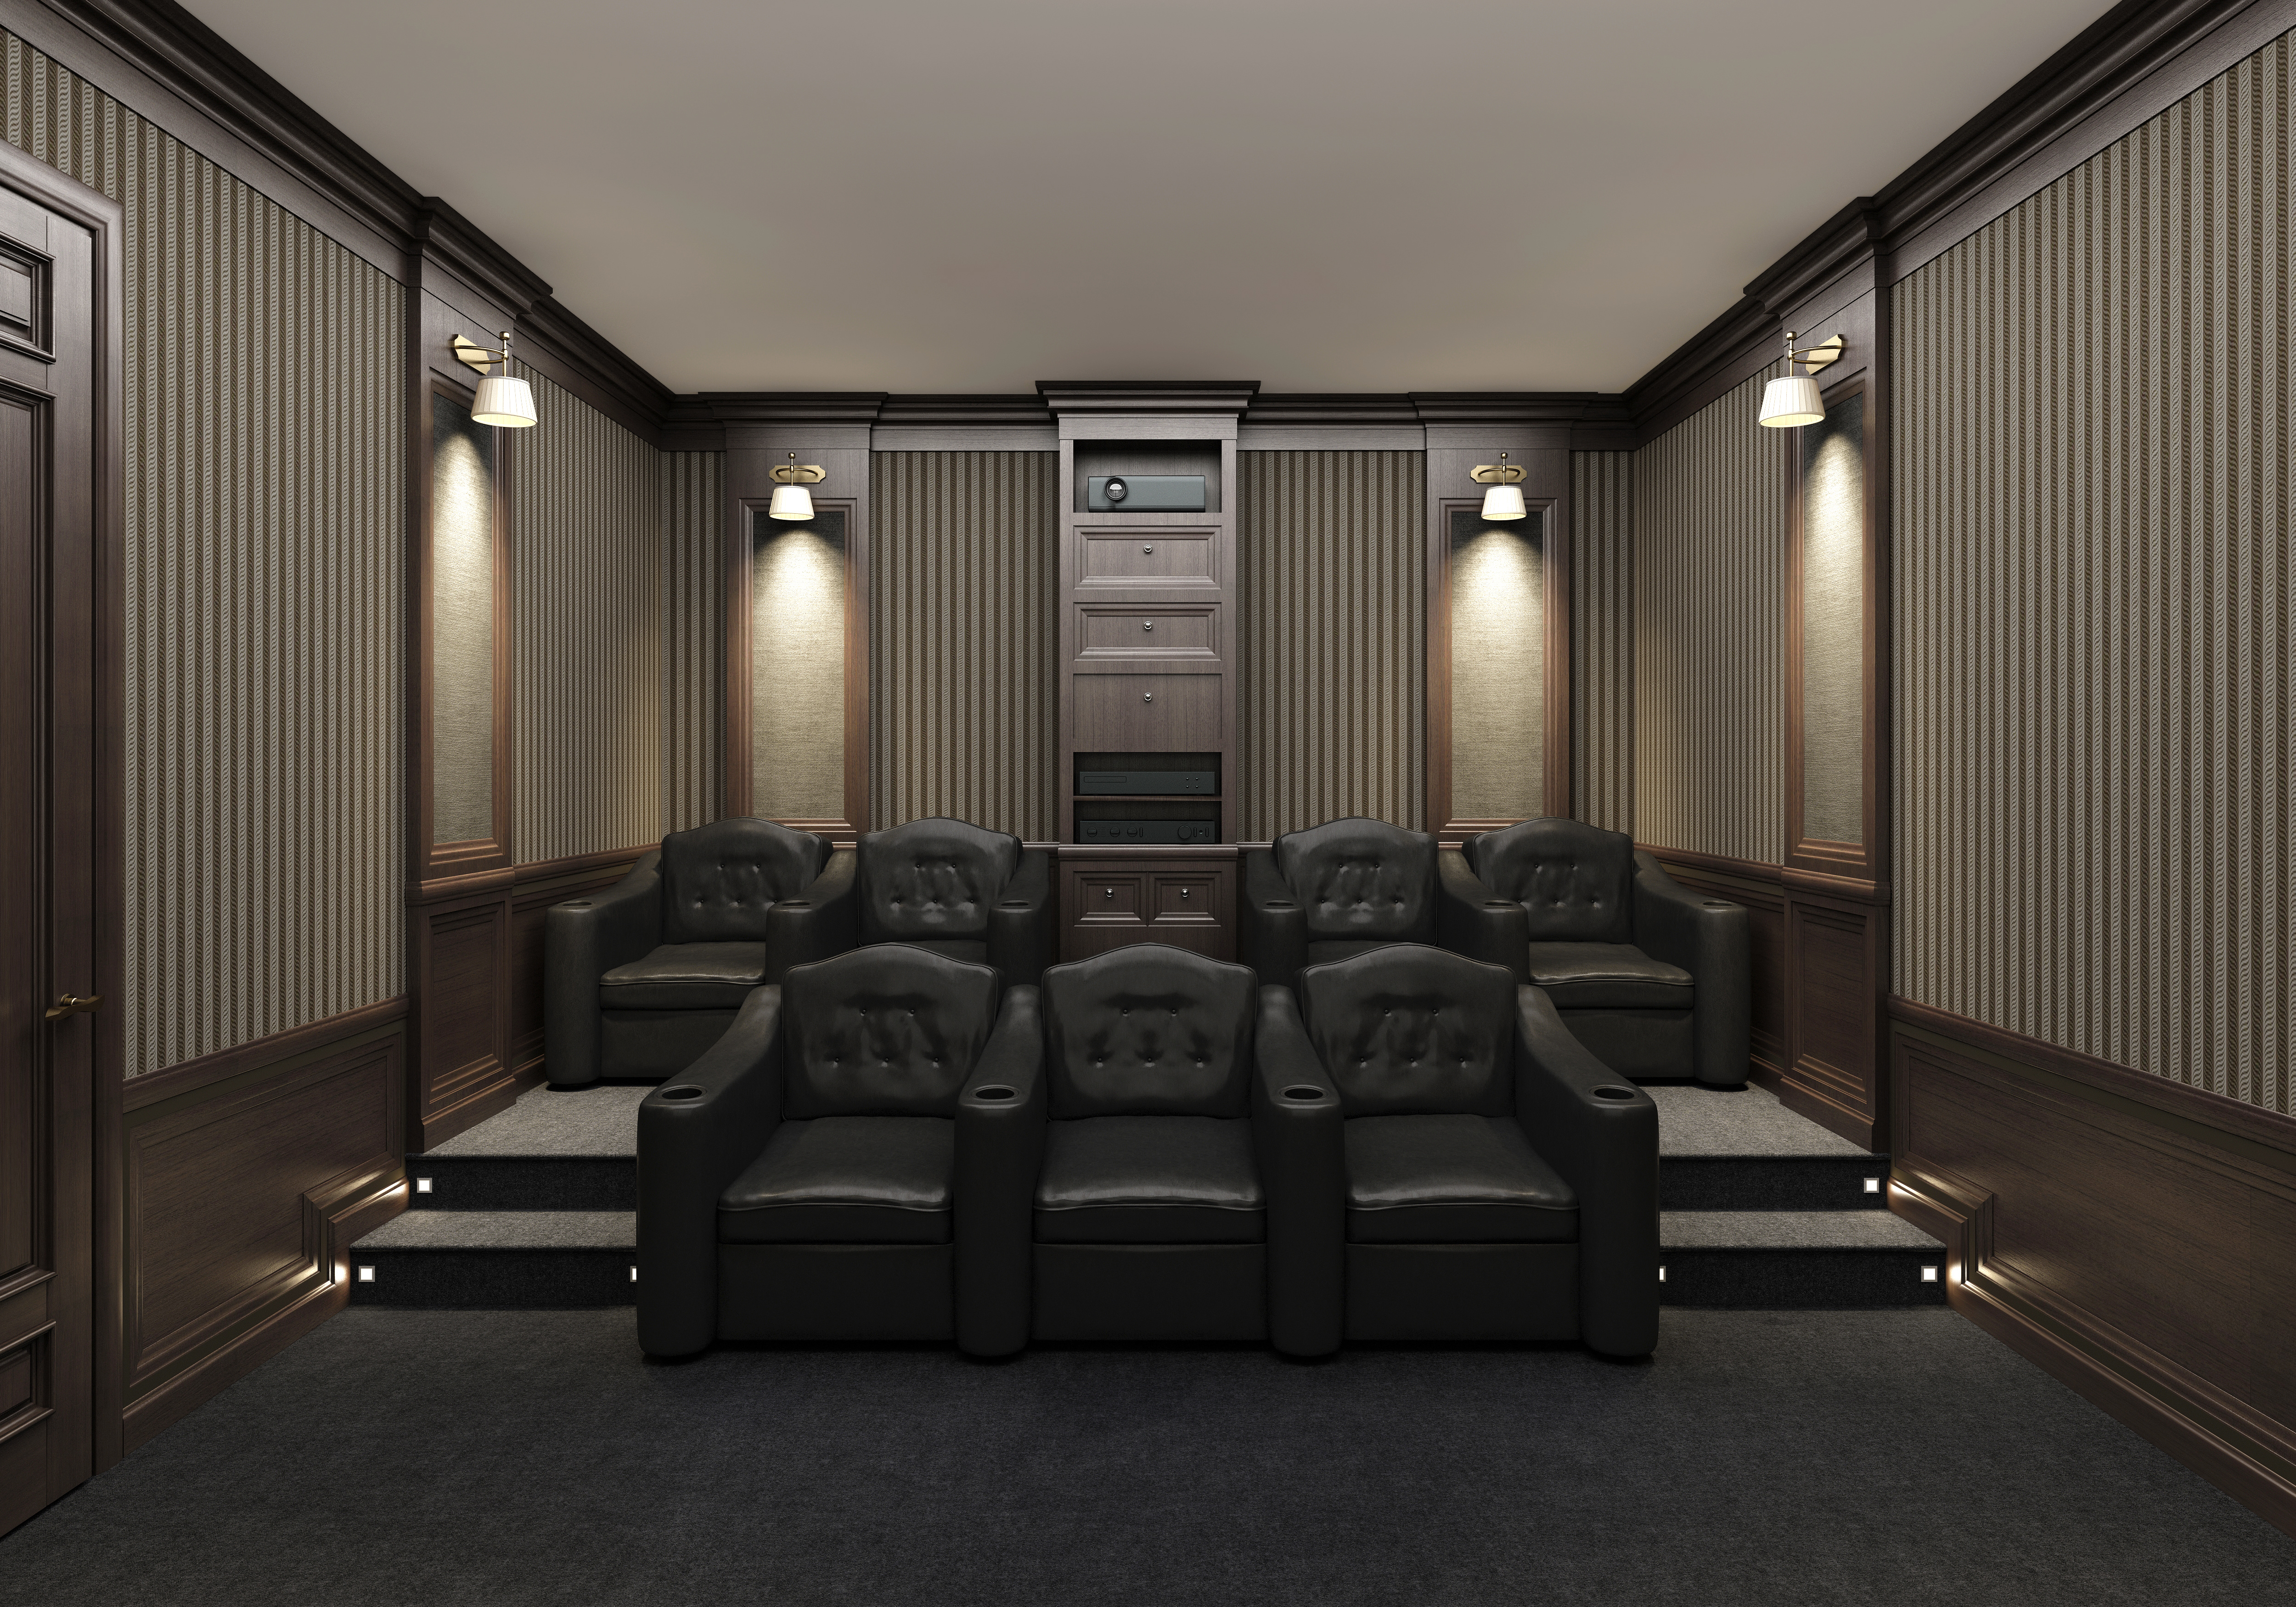 Home theater with large, comfy, black chairs, aisles, and decorative lighting